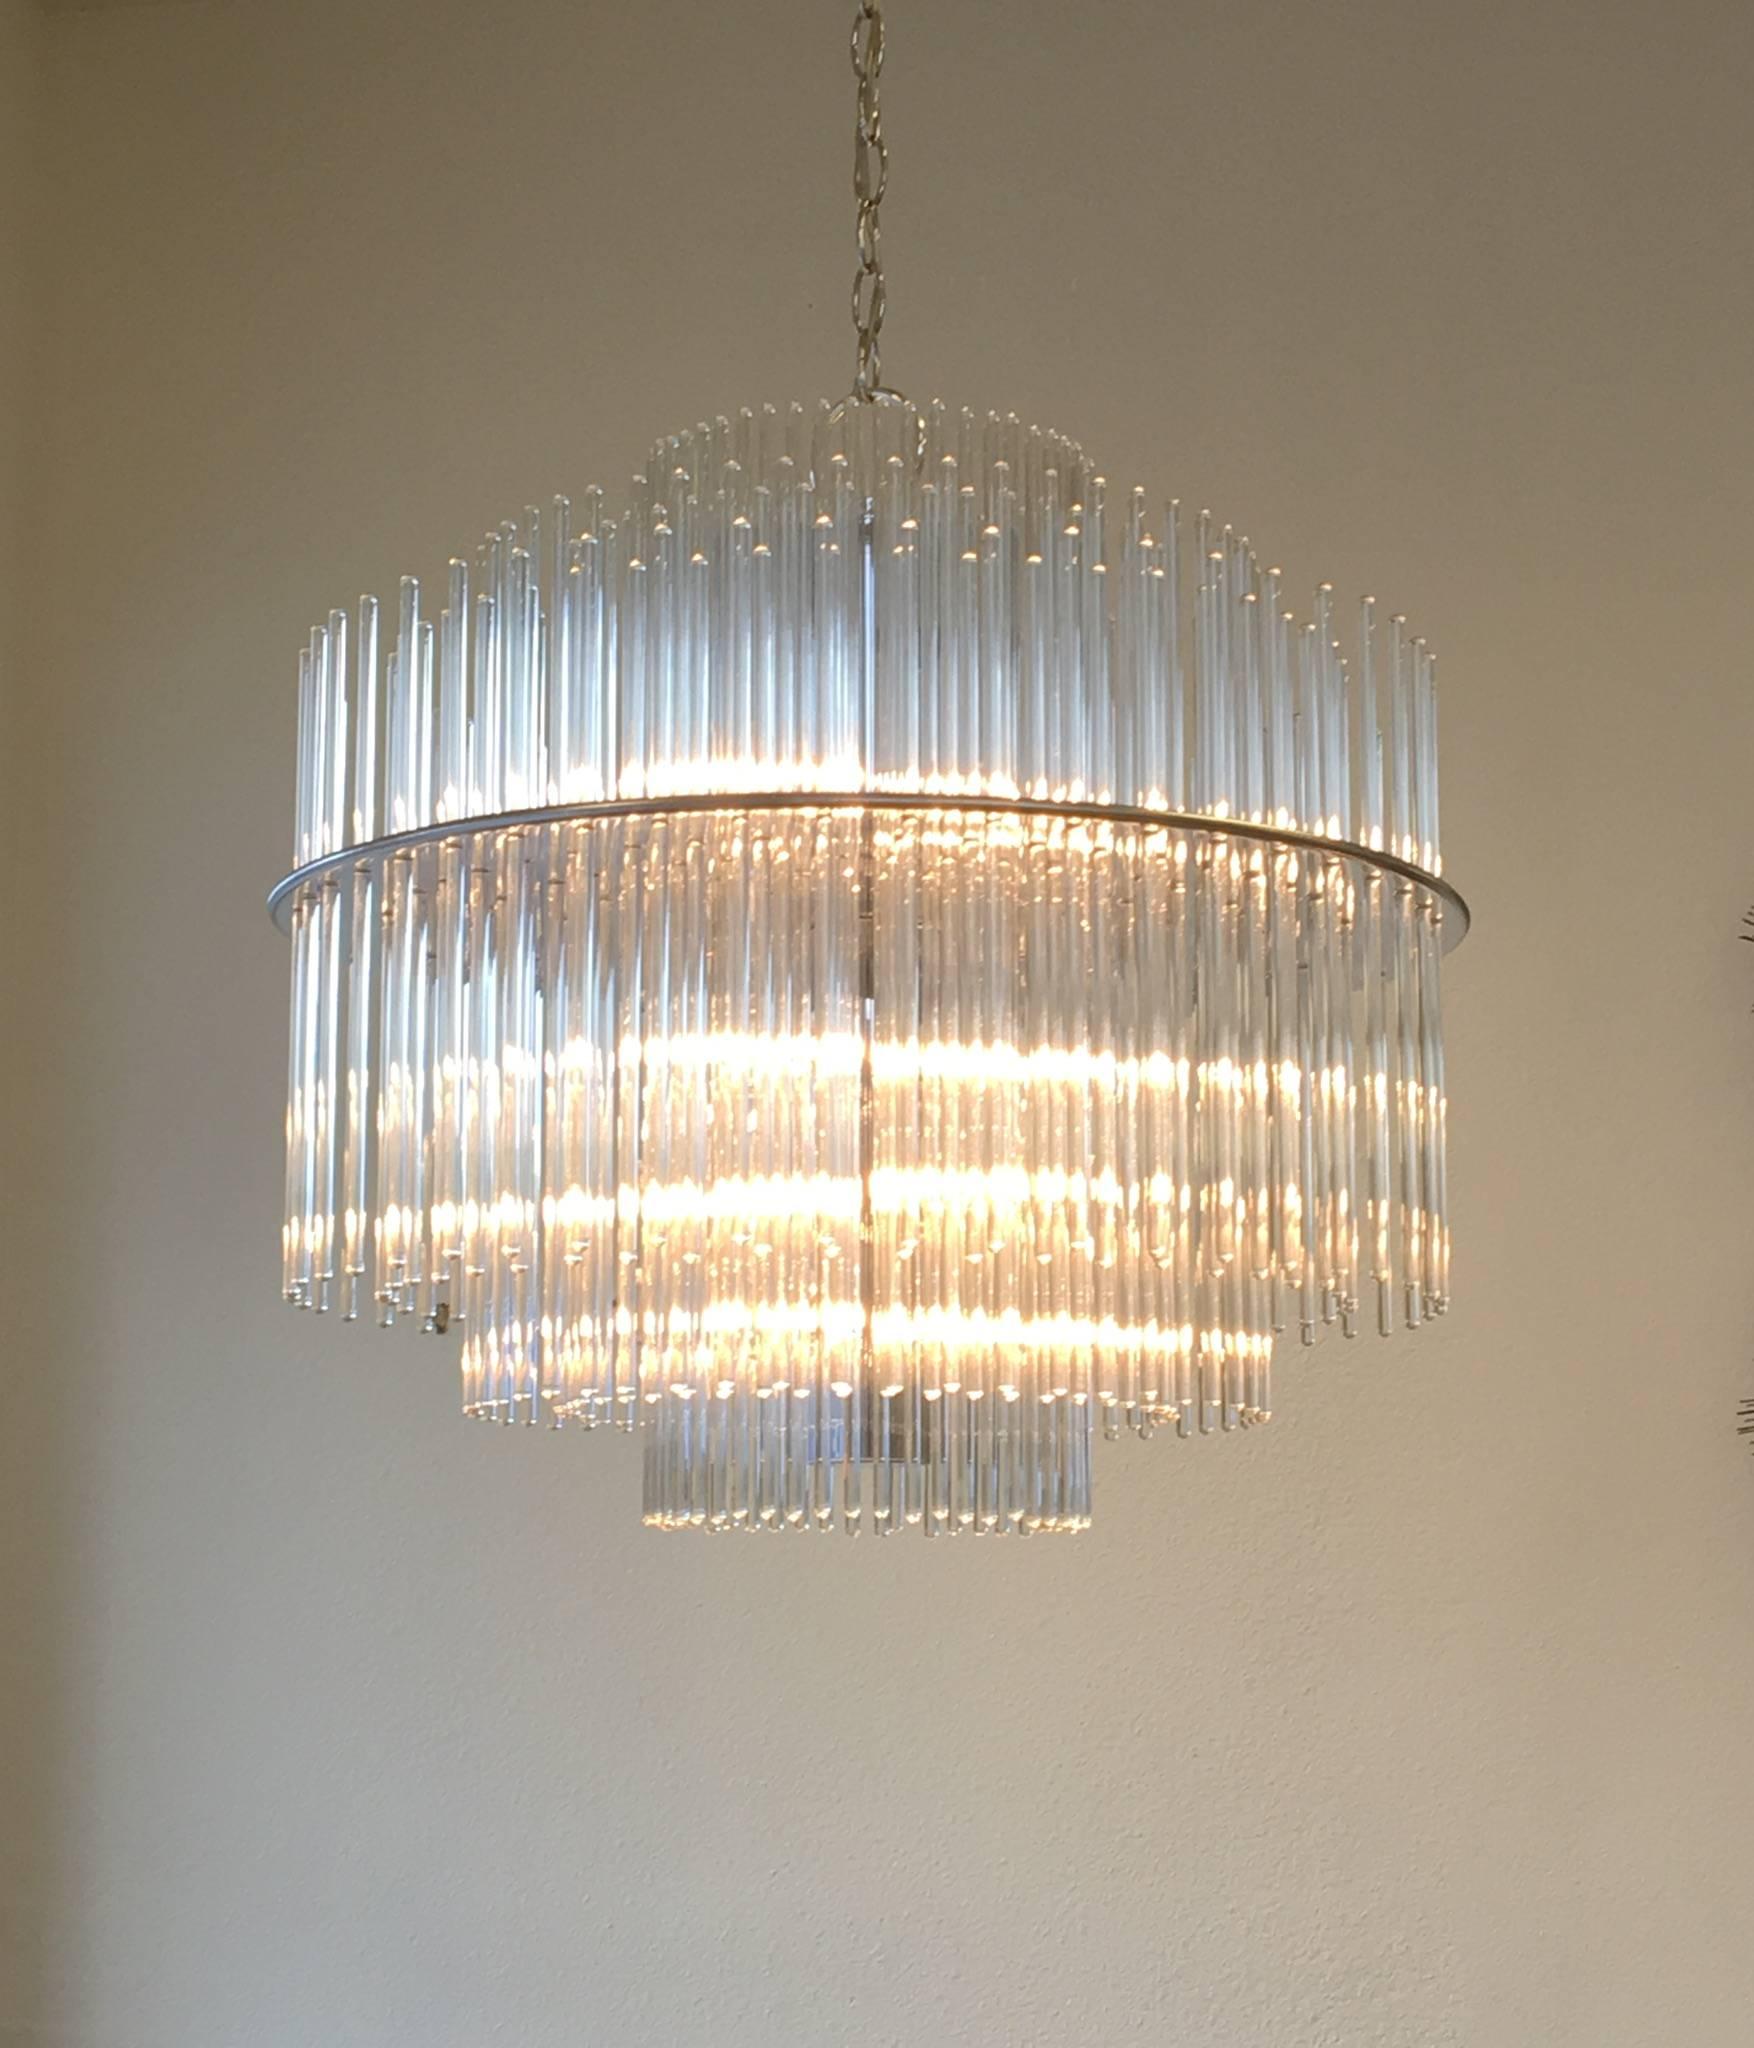 A glamorous polished chrome and glass rods chandelier designed by Lightolier in the 1970s. Newly rewired. We can make the chain any length you want.
Dimension: 22.5 inches diameter x 21.5 inches high.